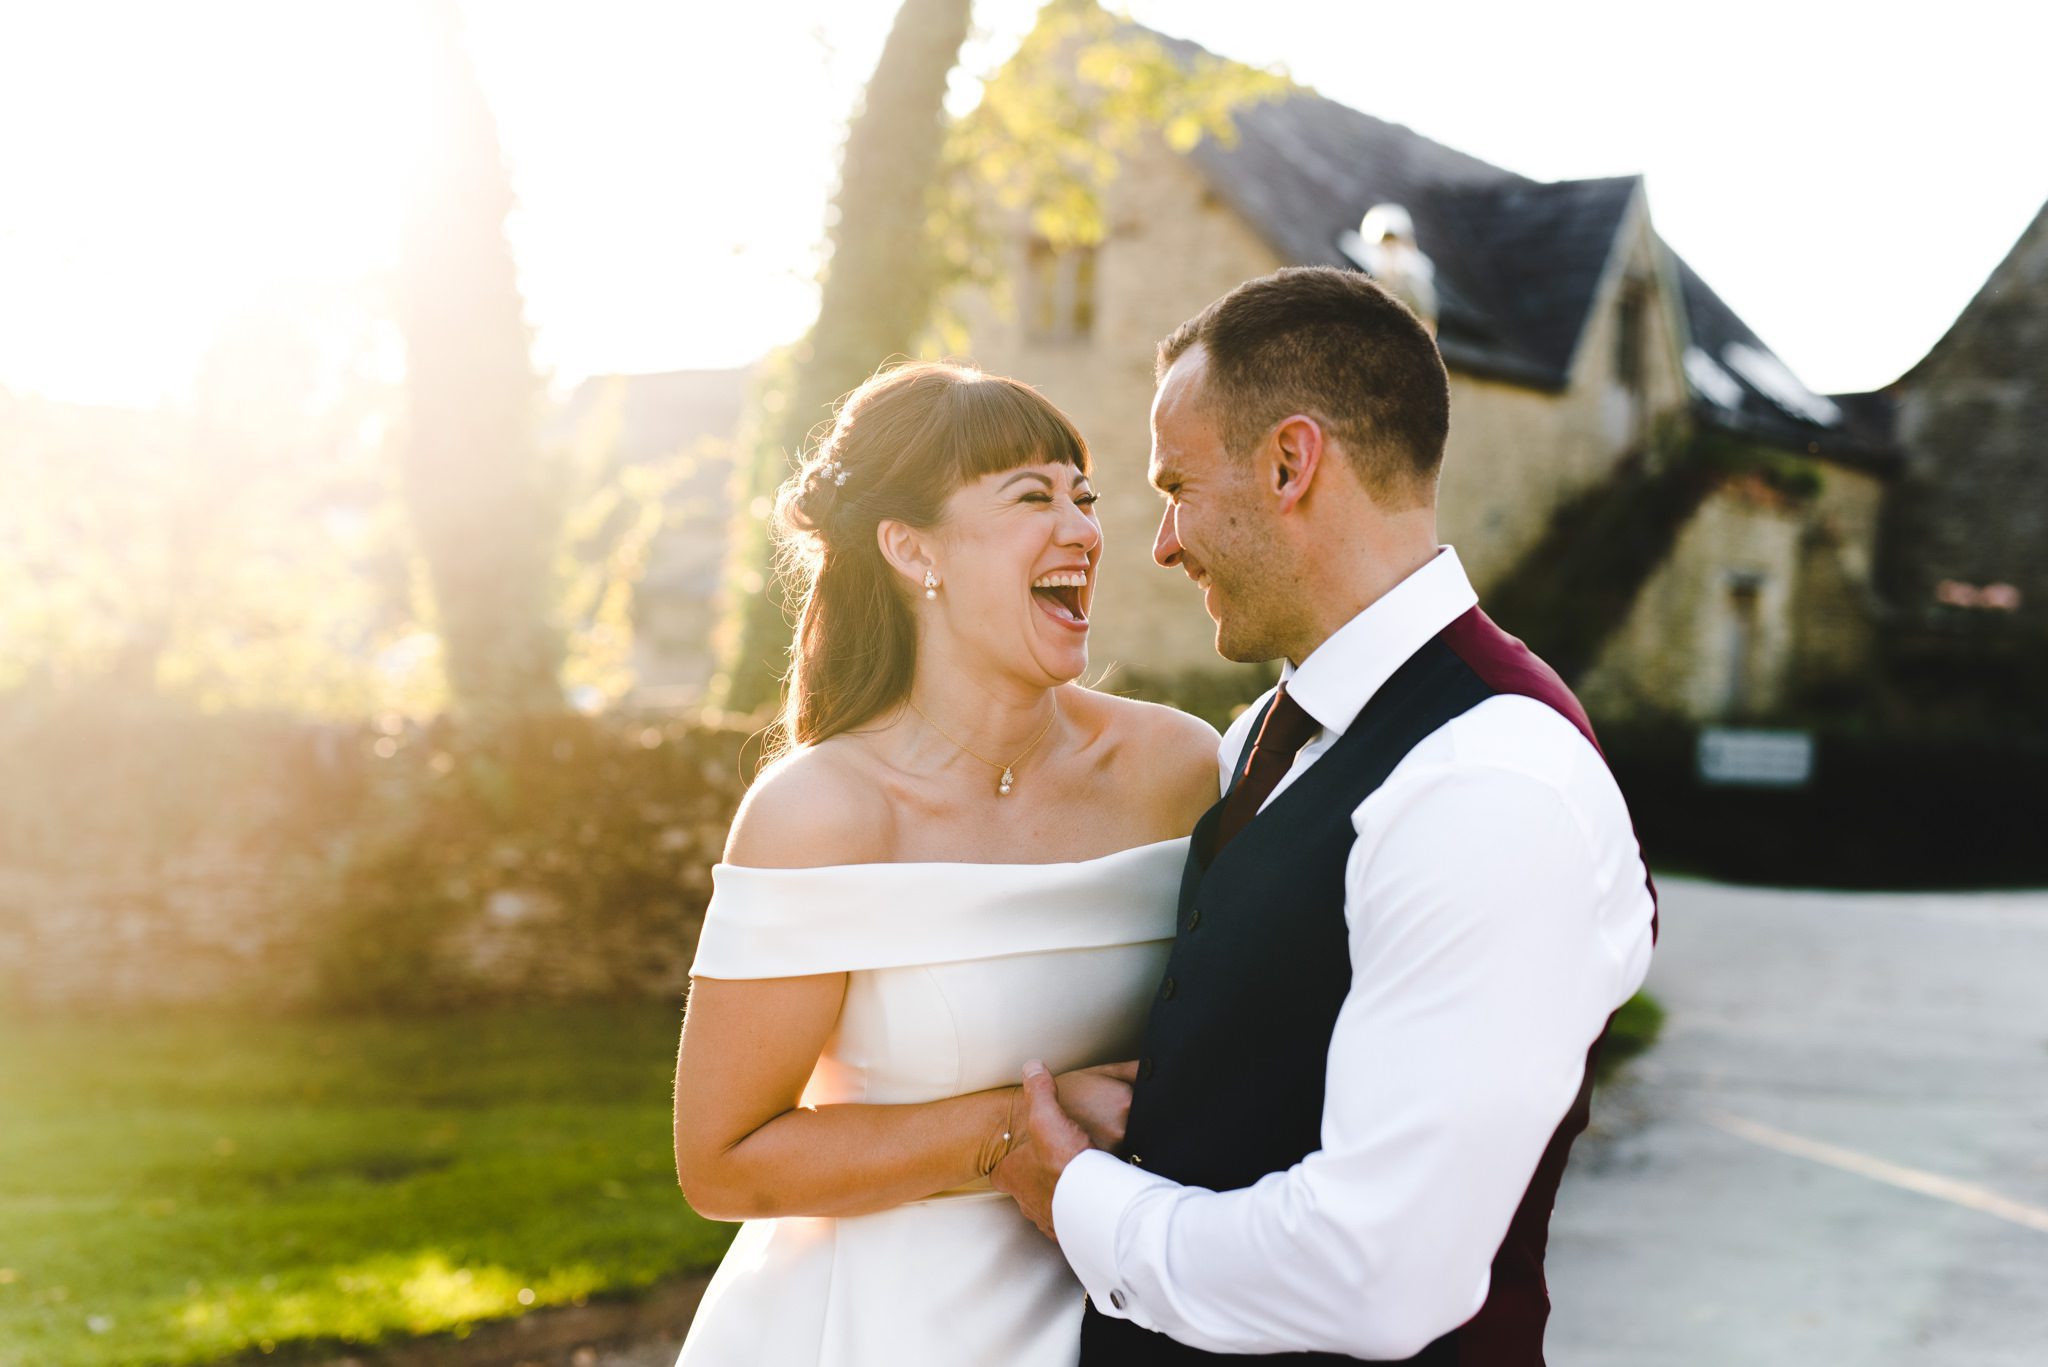 A bride and groom laughing together